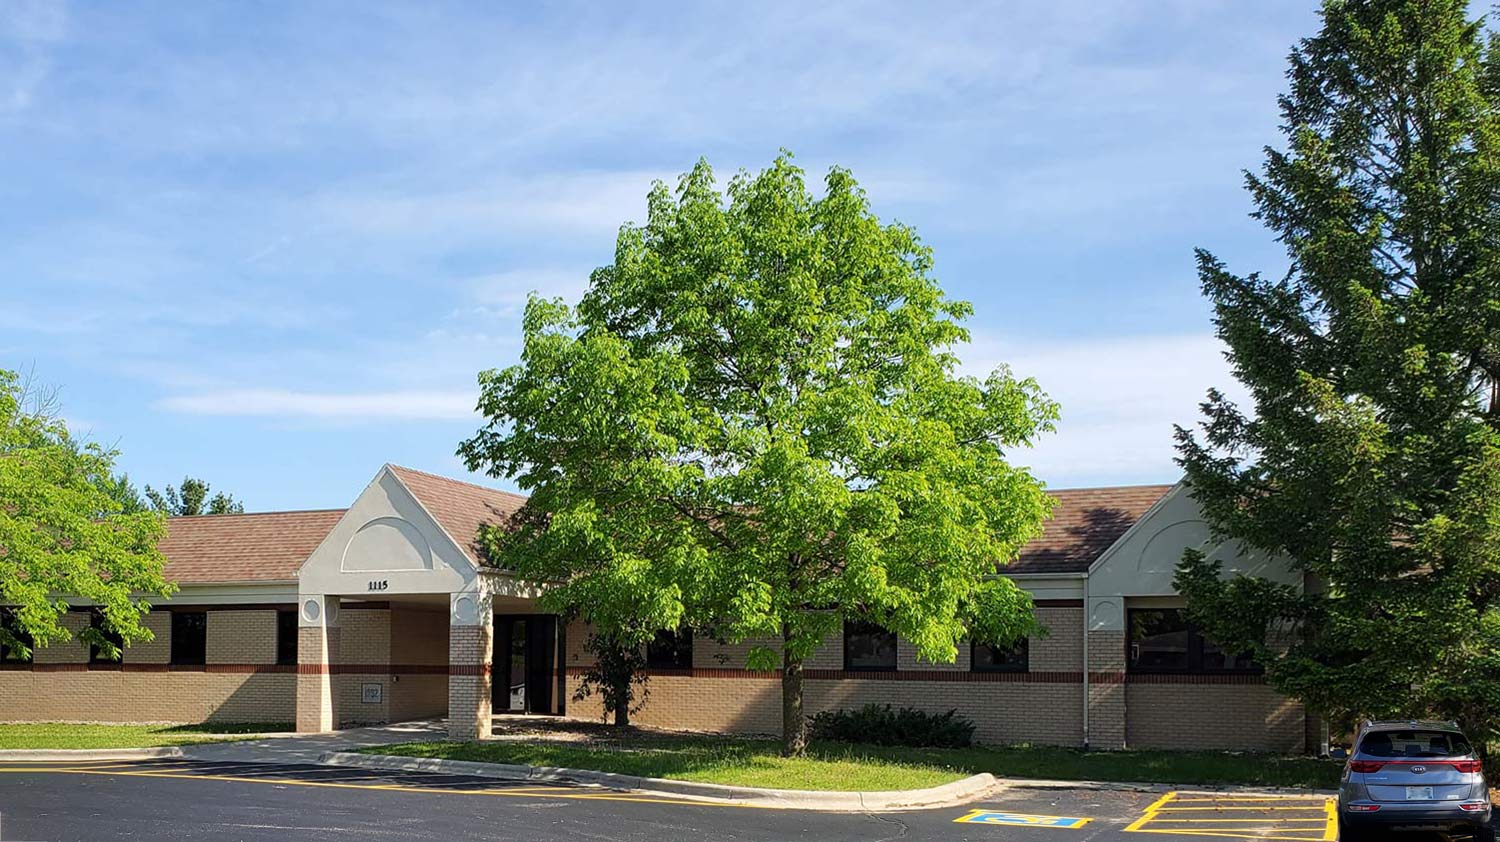 Kammer Law Office building, Portage, WI